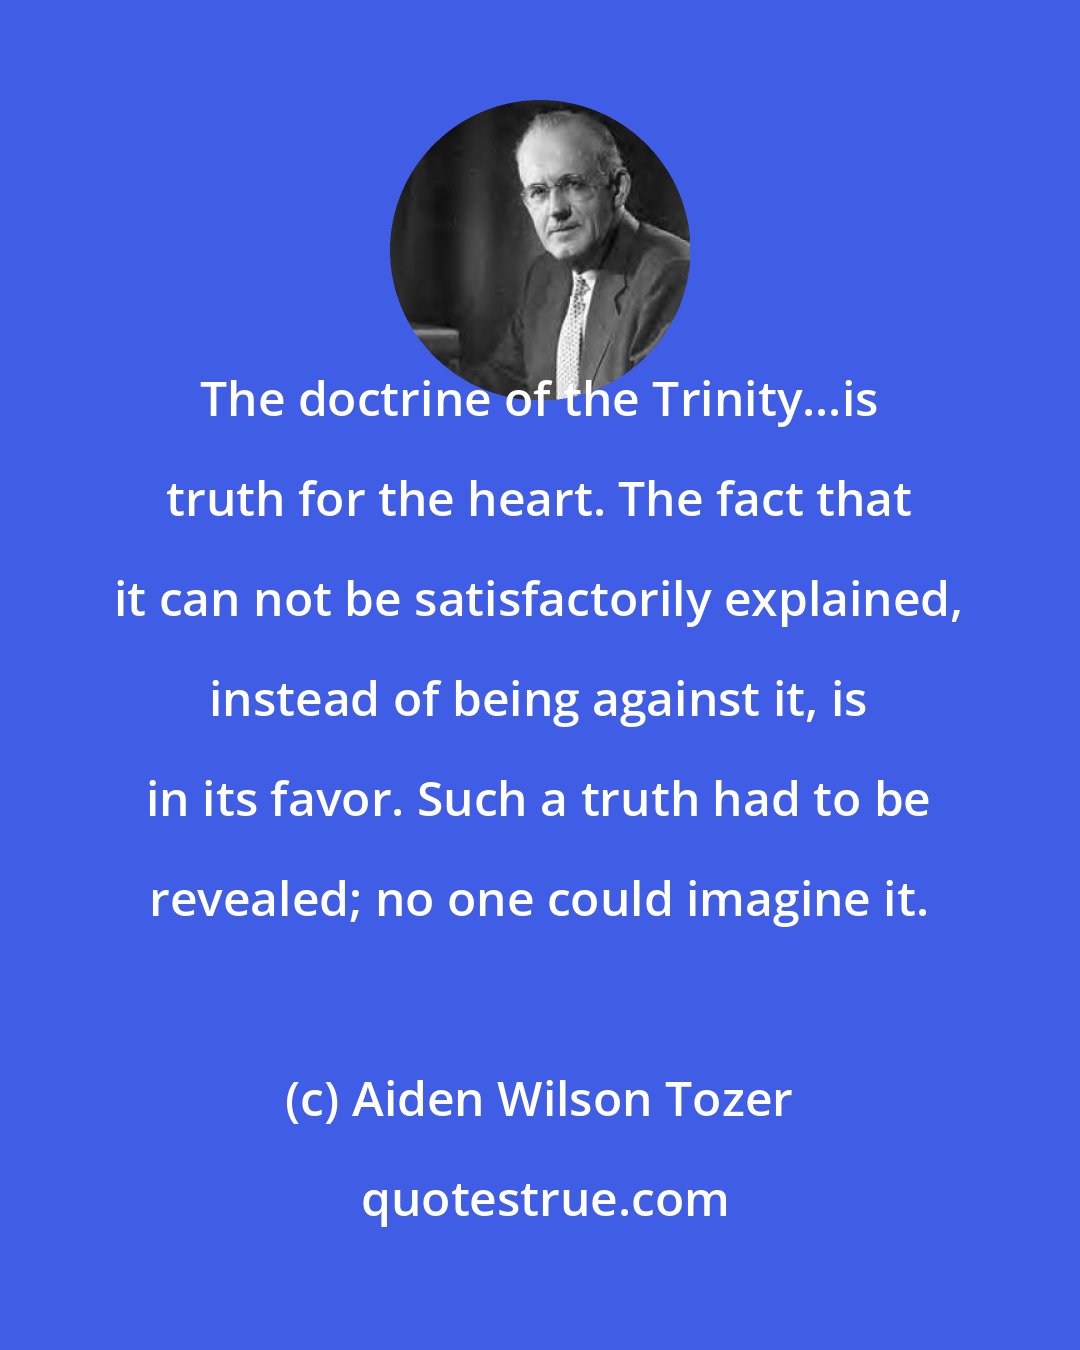 Aiden Wilson Tozer: The doctrine of the Trinity...is truth for the heart. The fact that it can not be satisfactorily explained, instead of being against it, is in its favor. Such a truth had to be revealed; no one could imagine it.